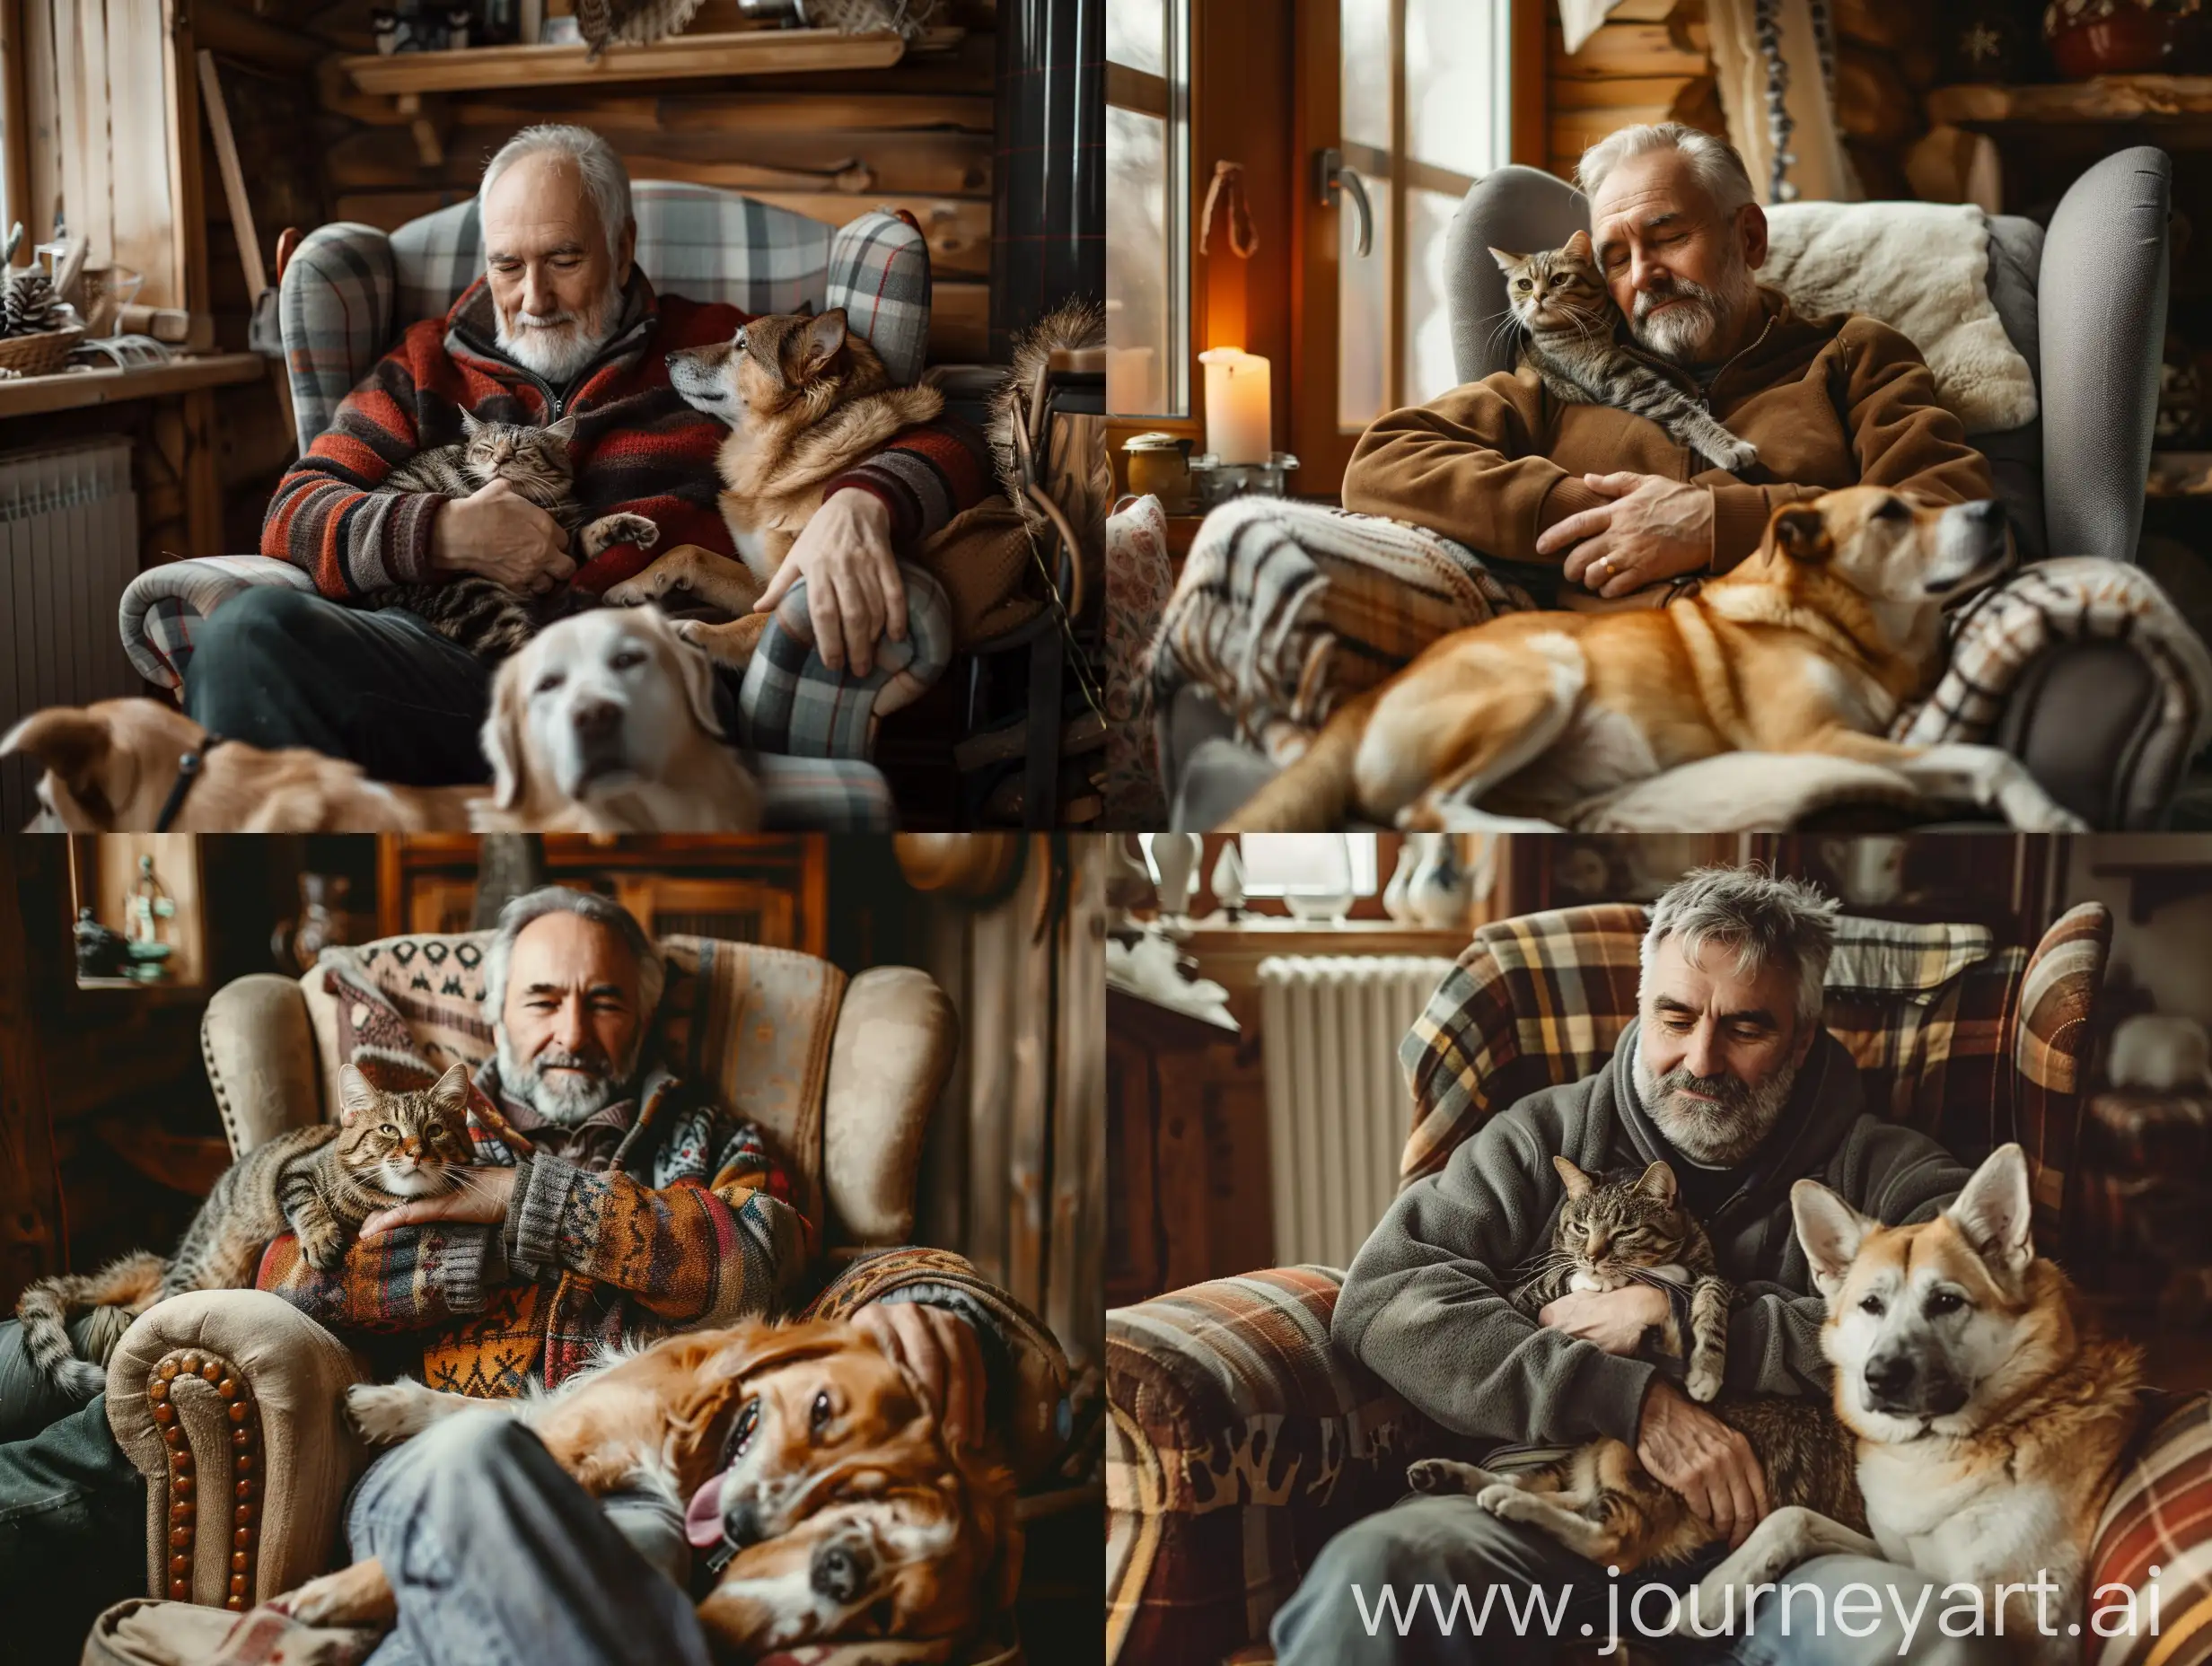 Cozy-Evening-with-Pets-Middleaged-Man-in-Armchair-with-Cat-and-Dog